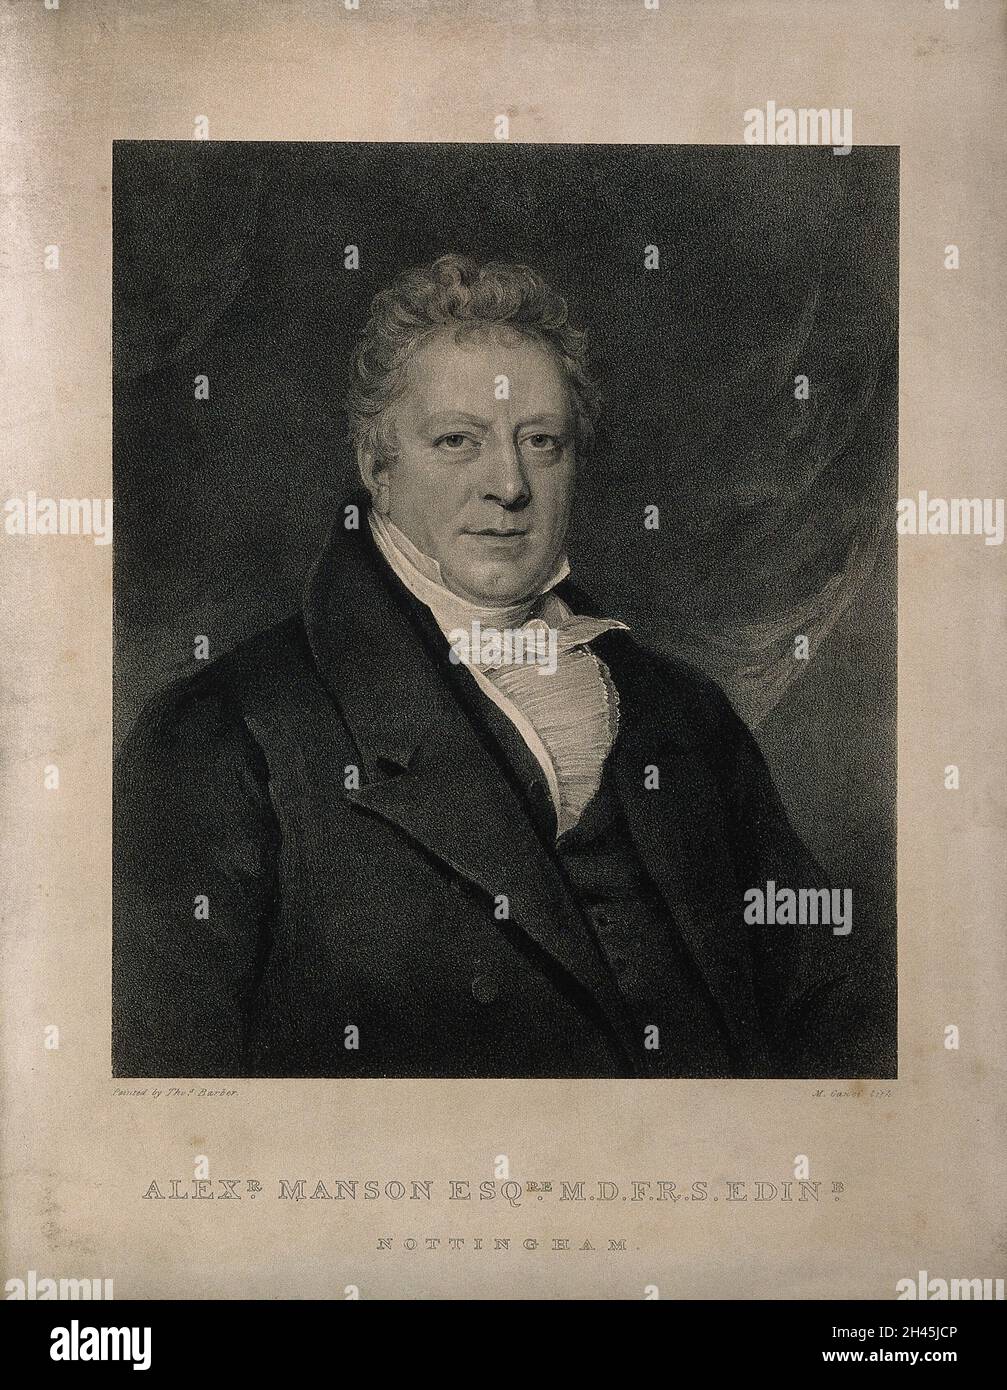 Alexander Manson. Lithograph by M. Gauci after T. Barber. Stock Photo